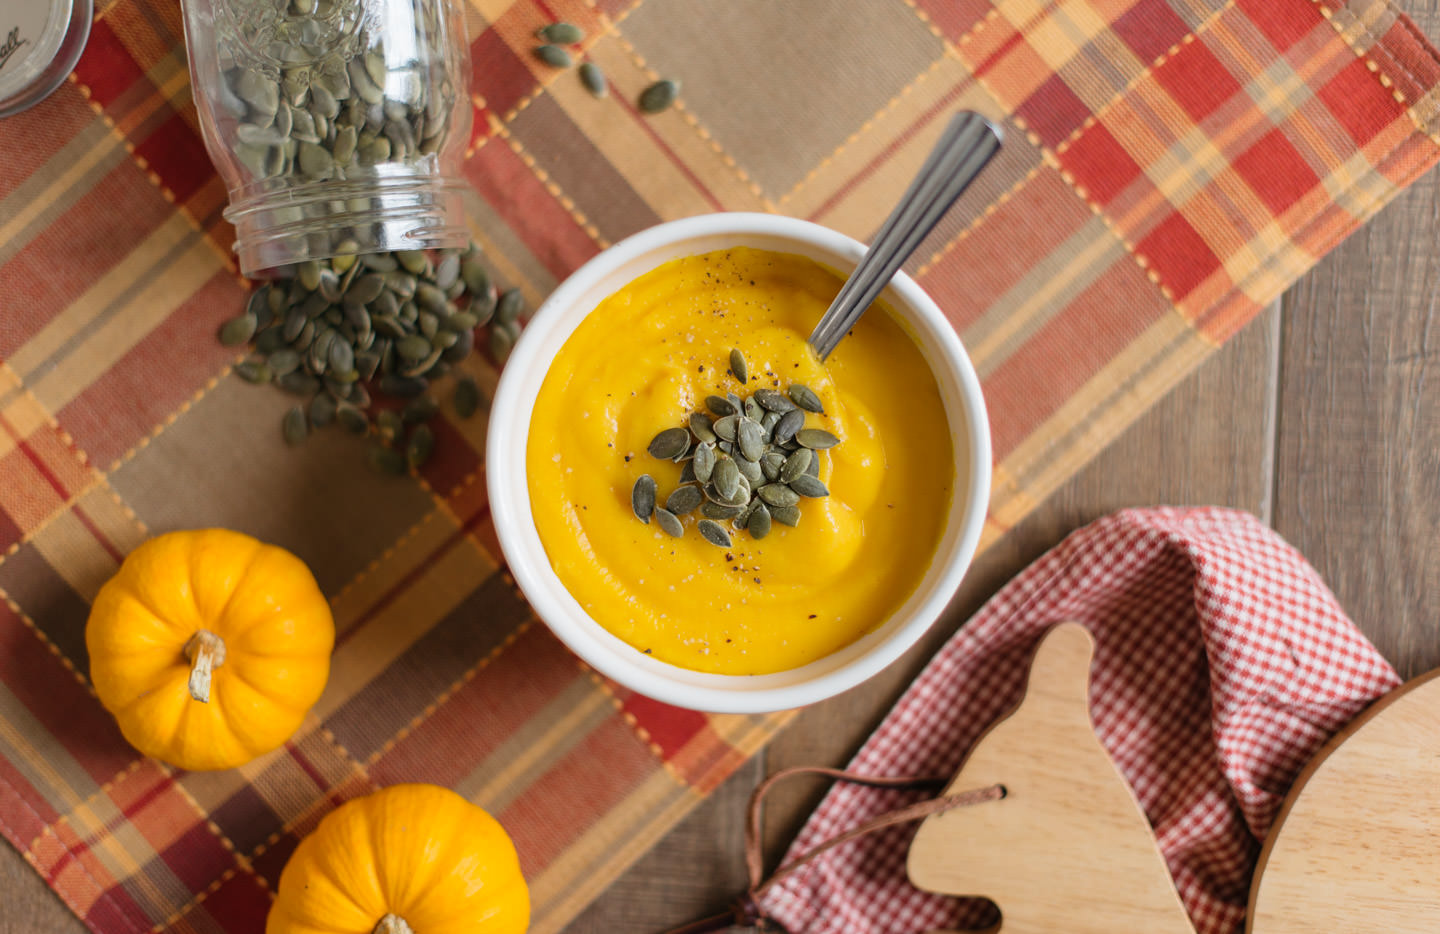 Blog-Mode-And-The-City-Food-Recette-Facile-Soupe-Automne-Hiver-2